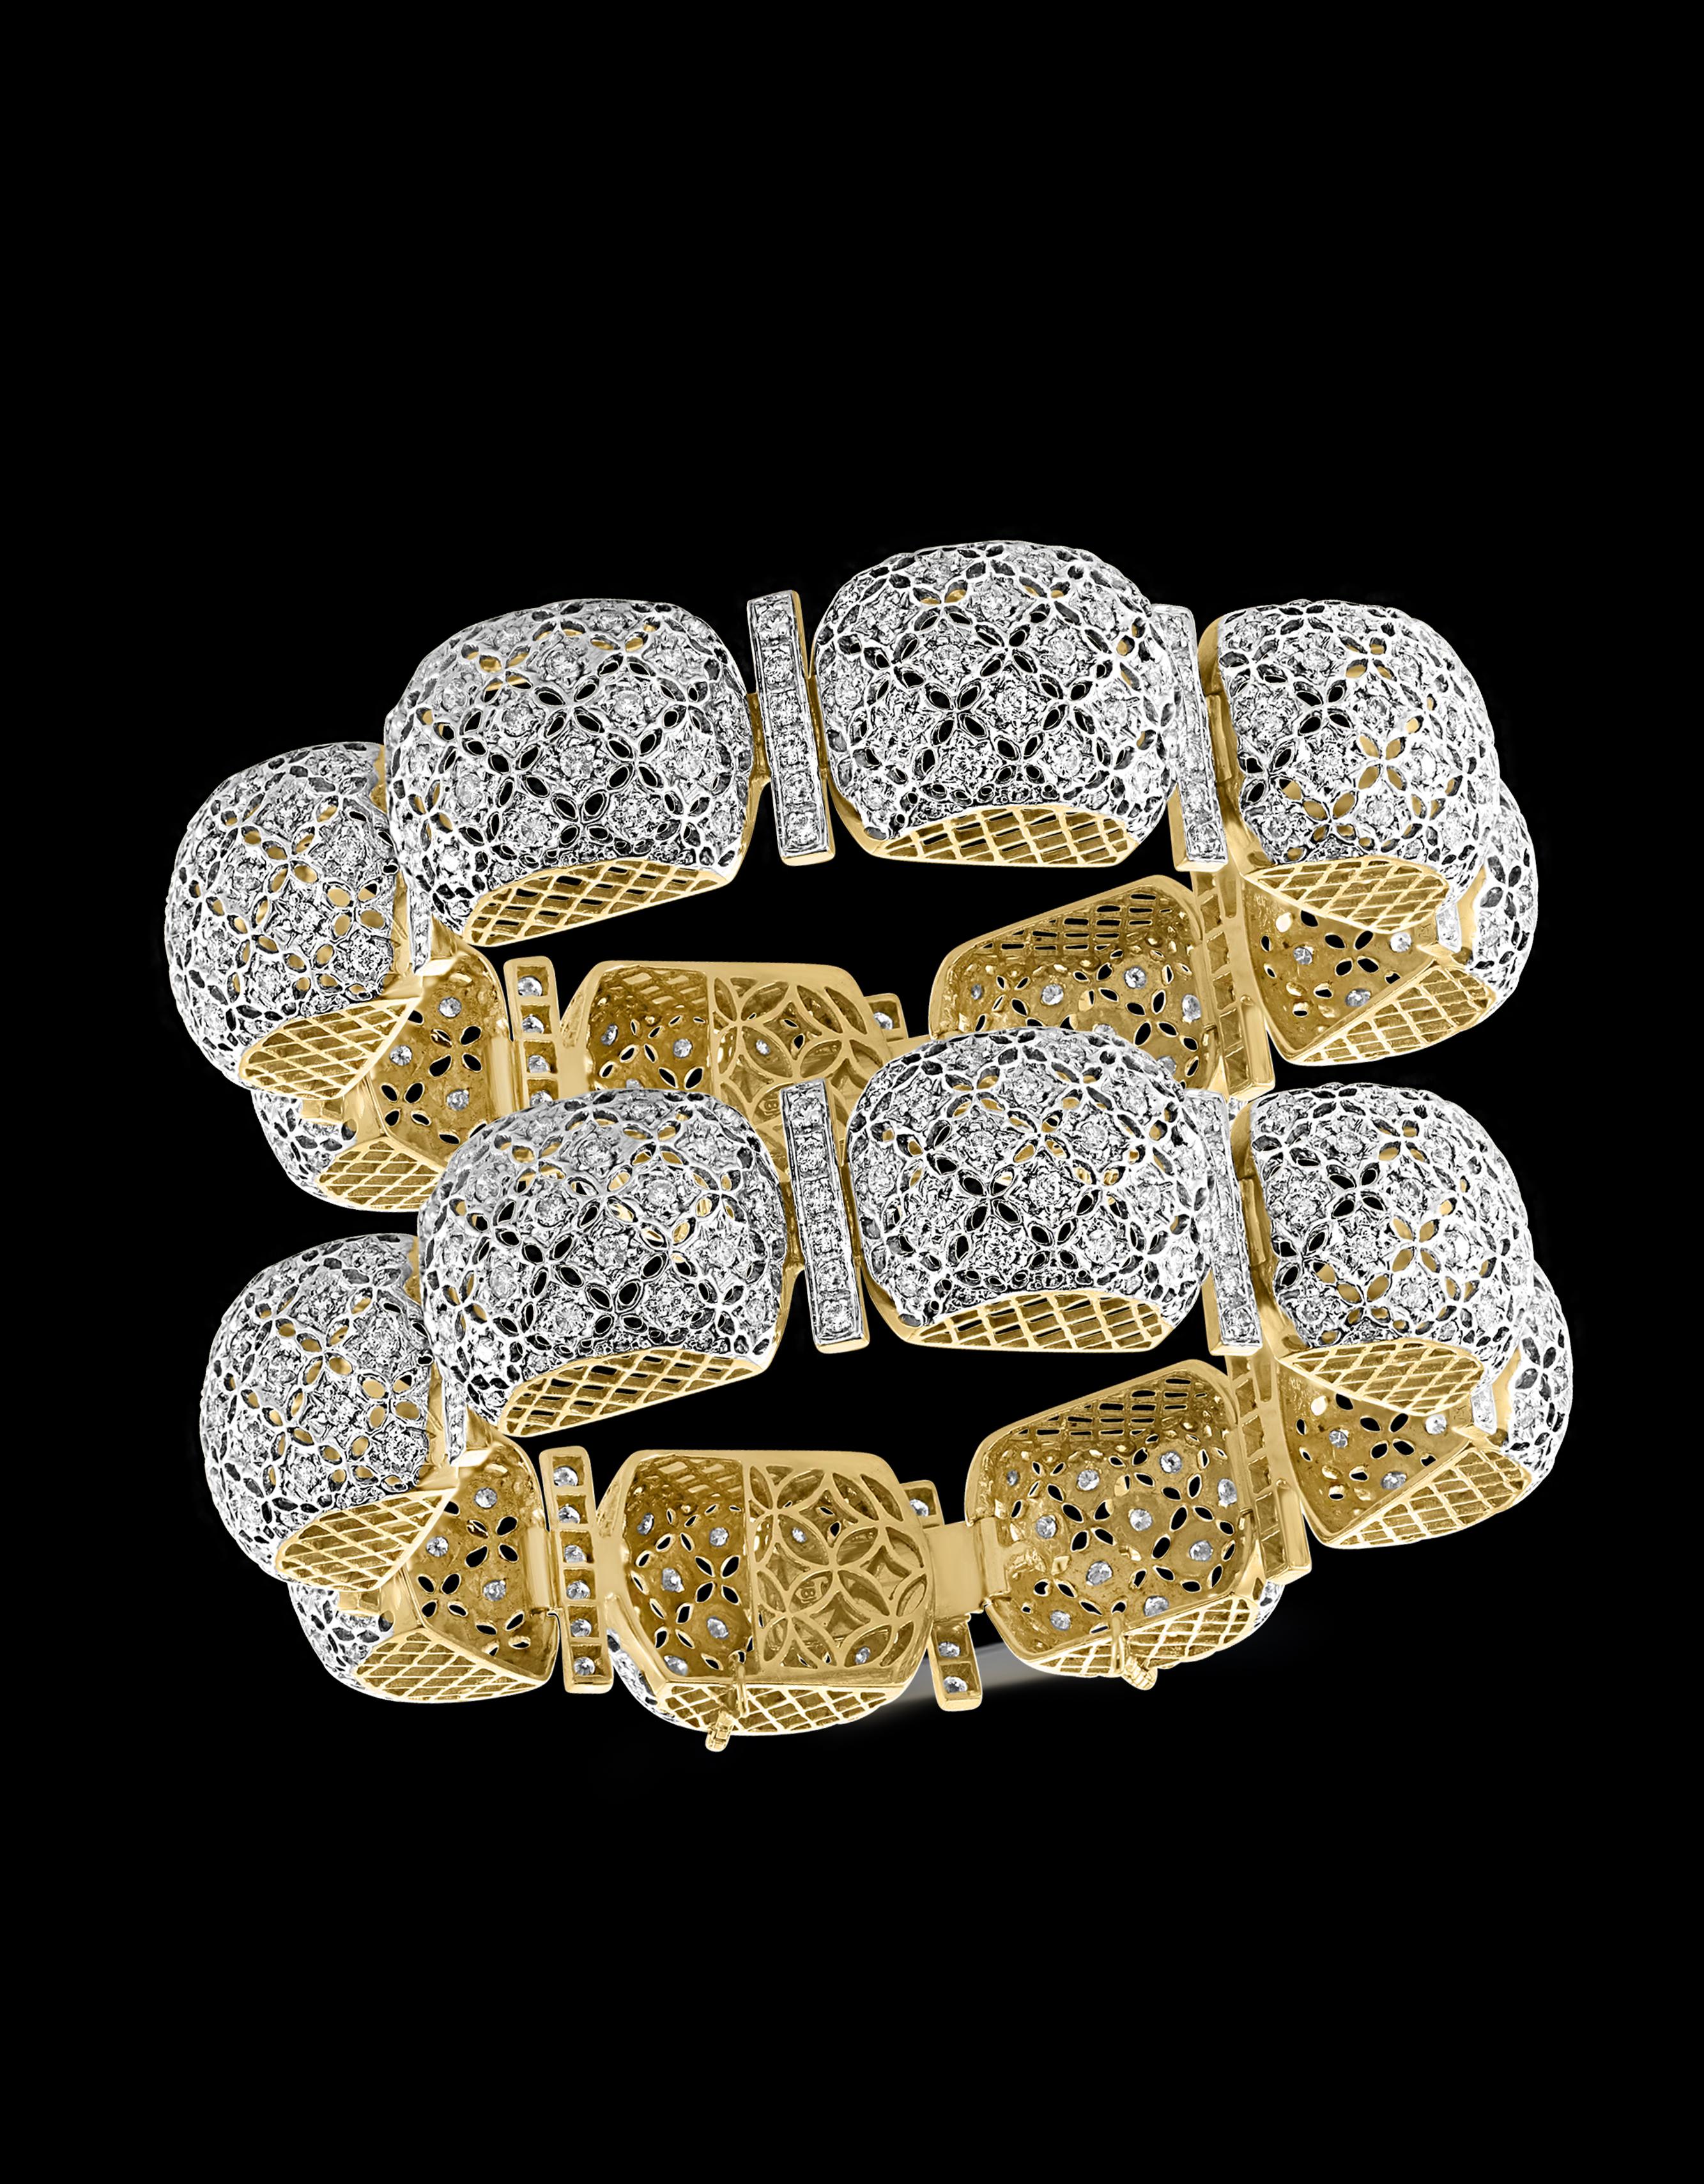 Mogul Style pair of Bangles  in 18 K gold featuring intricate workmanship 
It comes in a pair .
This  iconic and timeless bracelet from Mogul collection is finely crafted in 18 K Yellow gold and set with 9 carats of  brilliant-cut round diamonds.